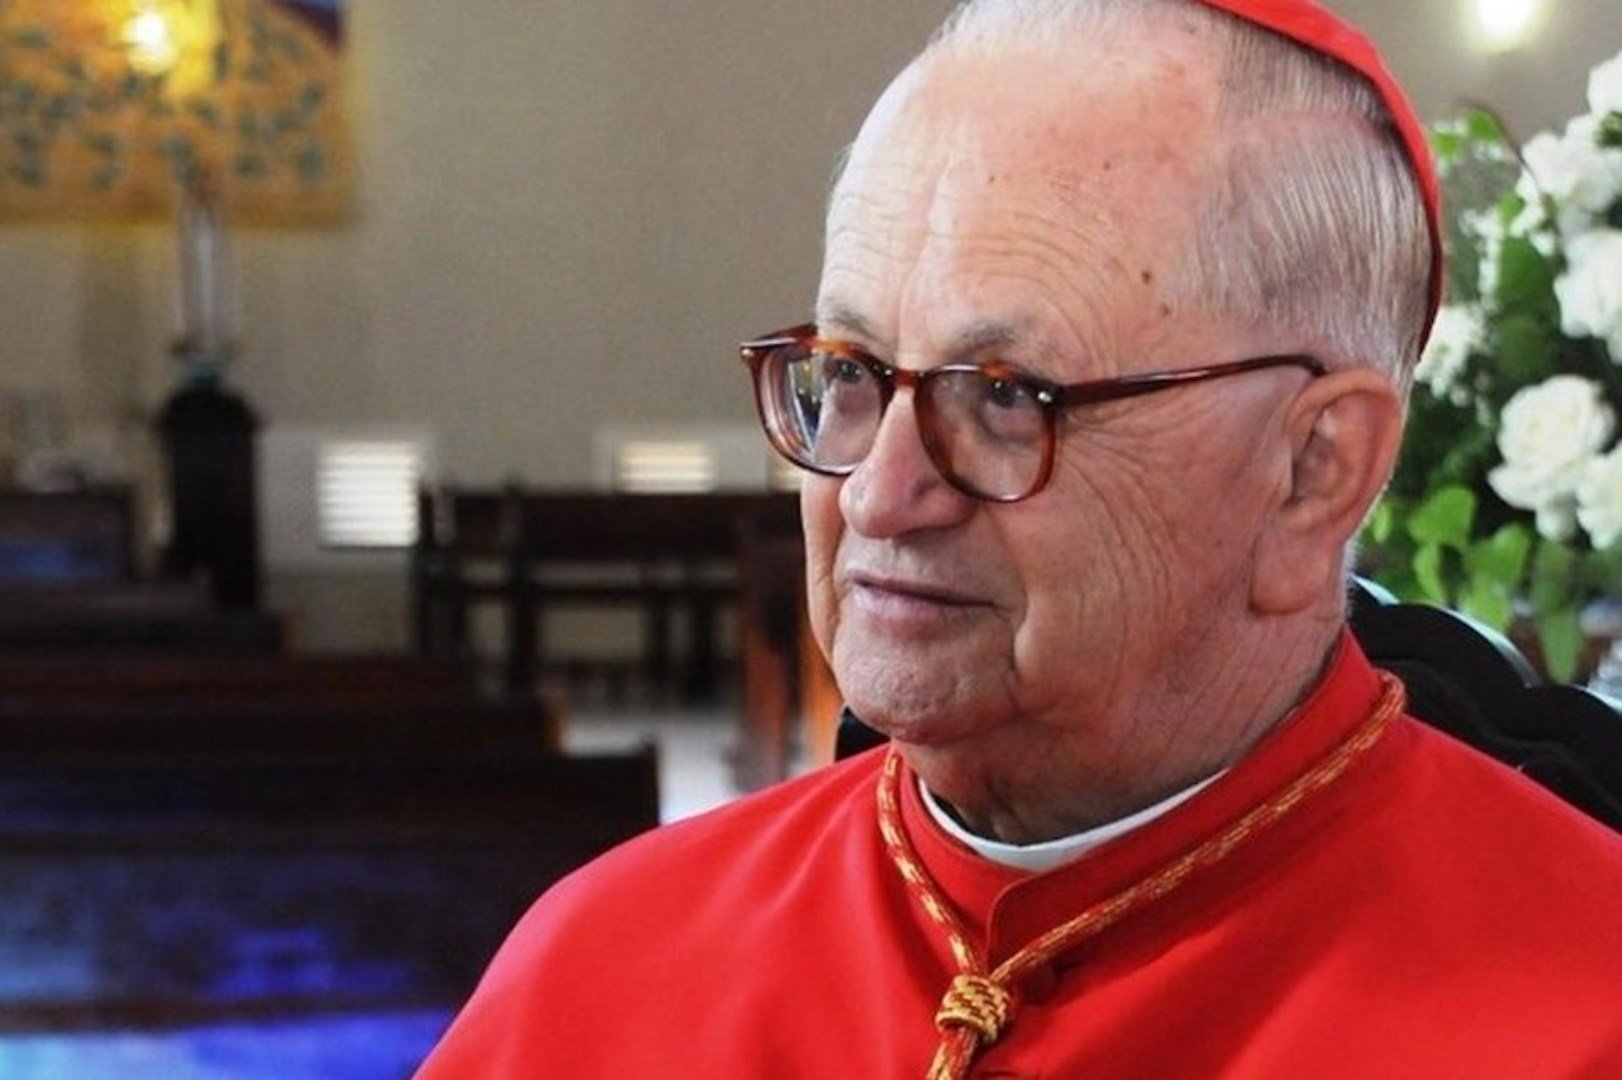 Retired Brazilian Cardinal Eusebio Scheid, 88, died in the interior of São Paulo state Jan. 13, after only a few days in the hospital with COVID-19. He is pictured in an undated photo. (CNS photo/courtesy Sao Jose dos Campos City Government) Editors: best quality available.